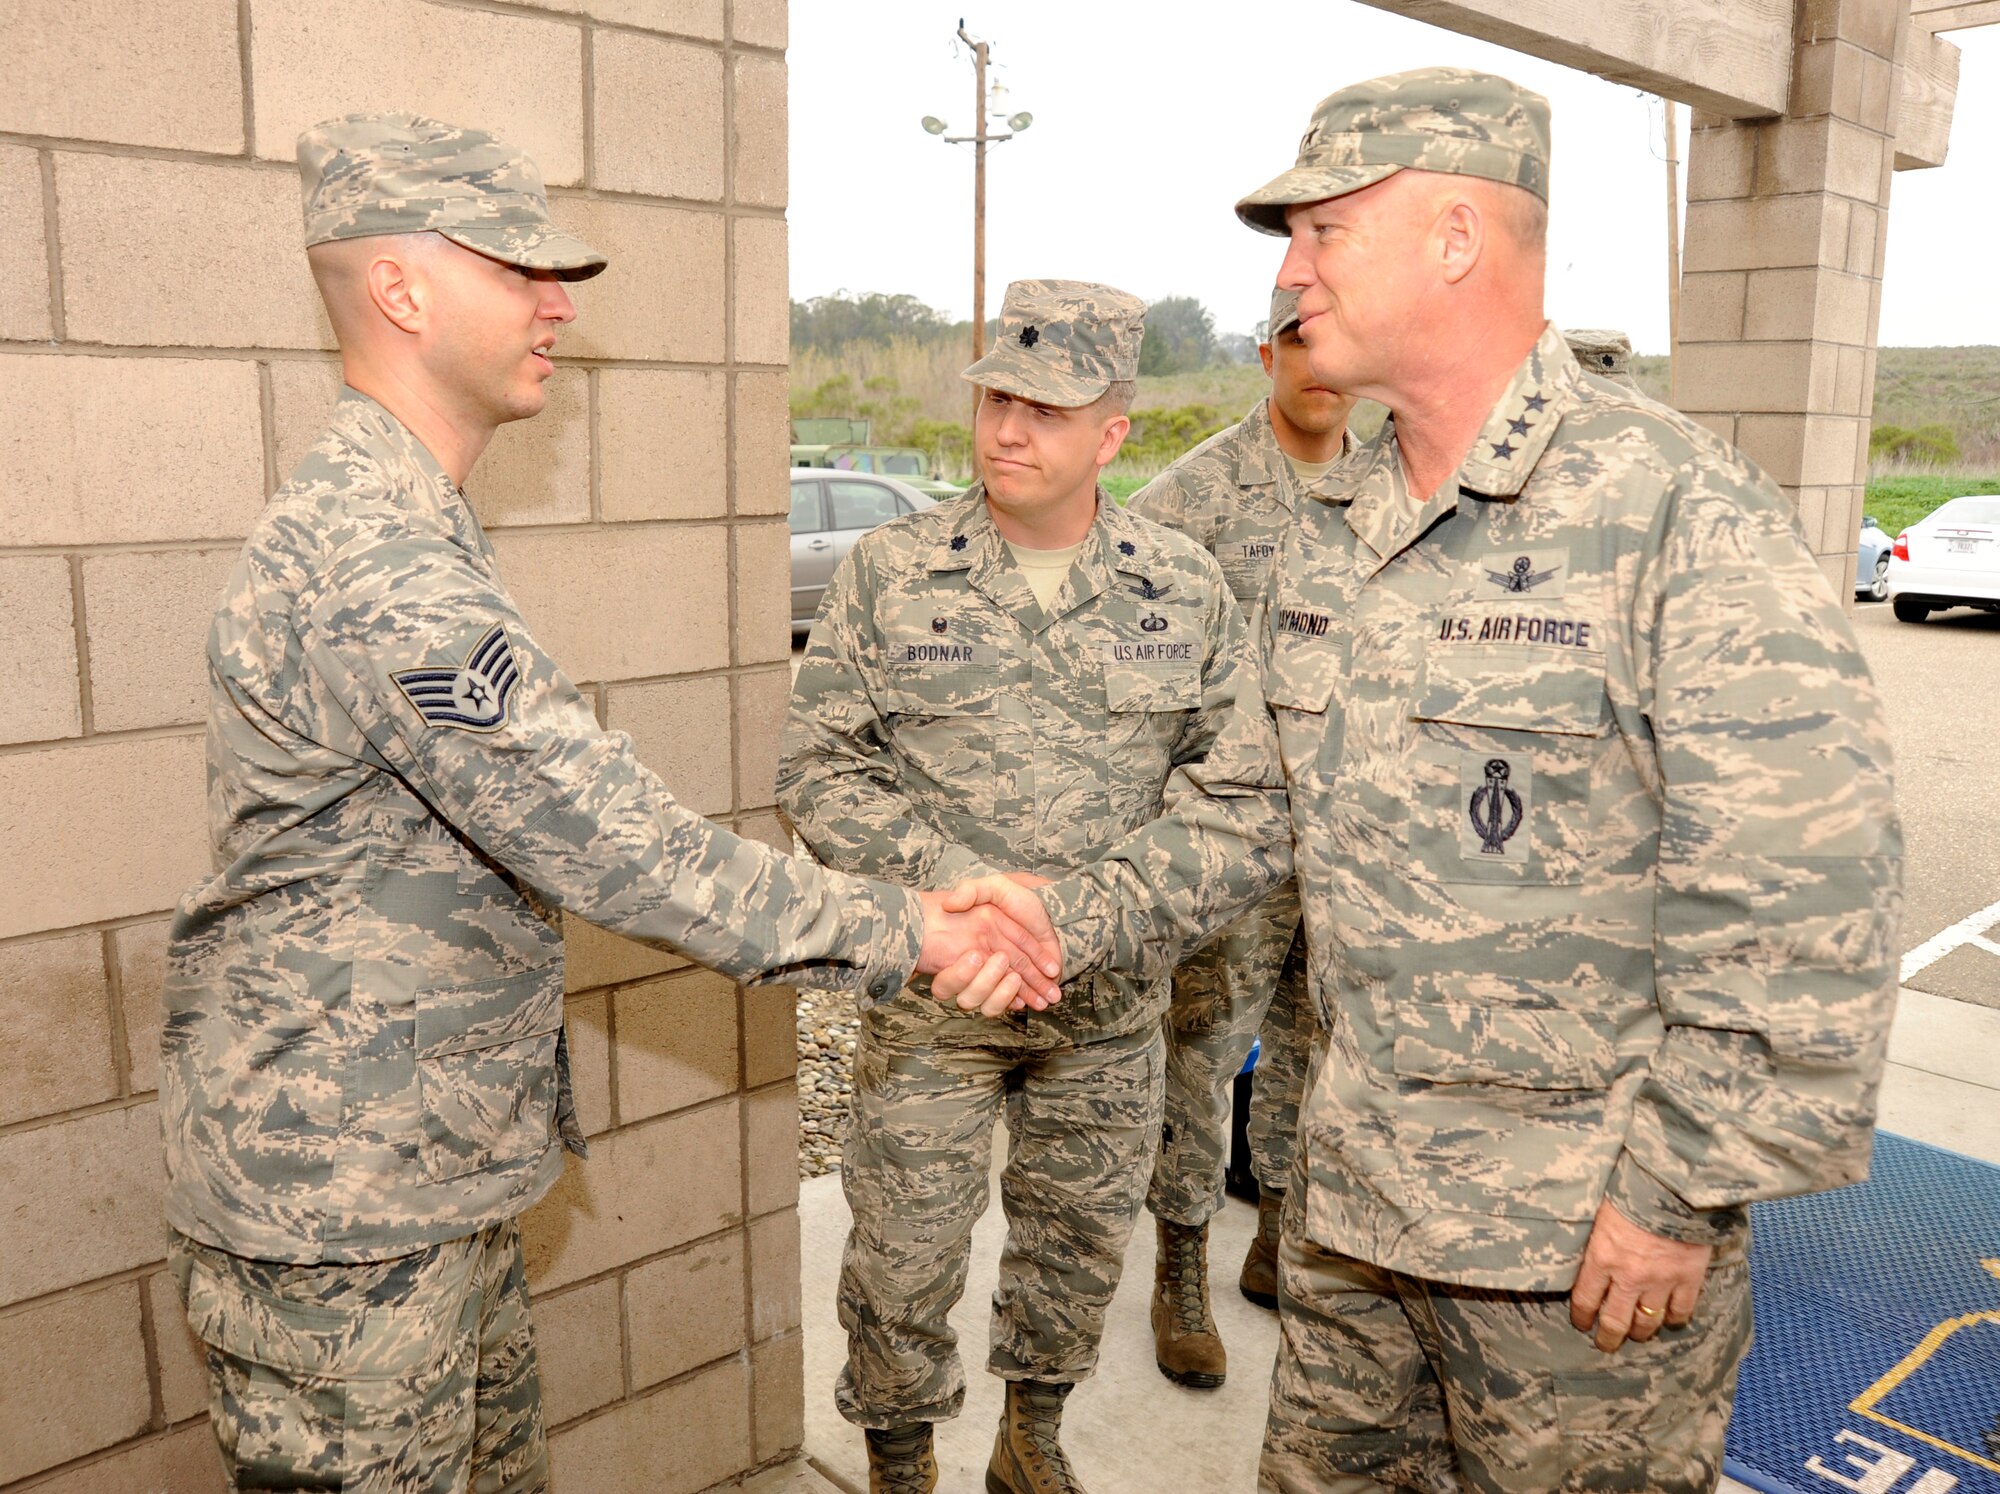 Staff Sgt. Robert Coleman, 4th Space Launch Squadron facility manager, greets Lt. Gen. John Raymond, Commander, 14th Air Force (Air Forces Strategic) and Joint Functional Component Command for Space, during a base tour, Feb. 17, 2015, Vandenberg Air Force Base, Calif. The tour highlighted several base support organizations such as the 30th Security Forces Squadron and 30th Civil Engineer Squadron.   (U.S. Air Force Photo by Airman Robert J. Volio/Released)